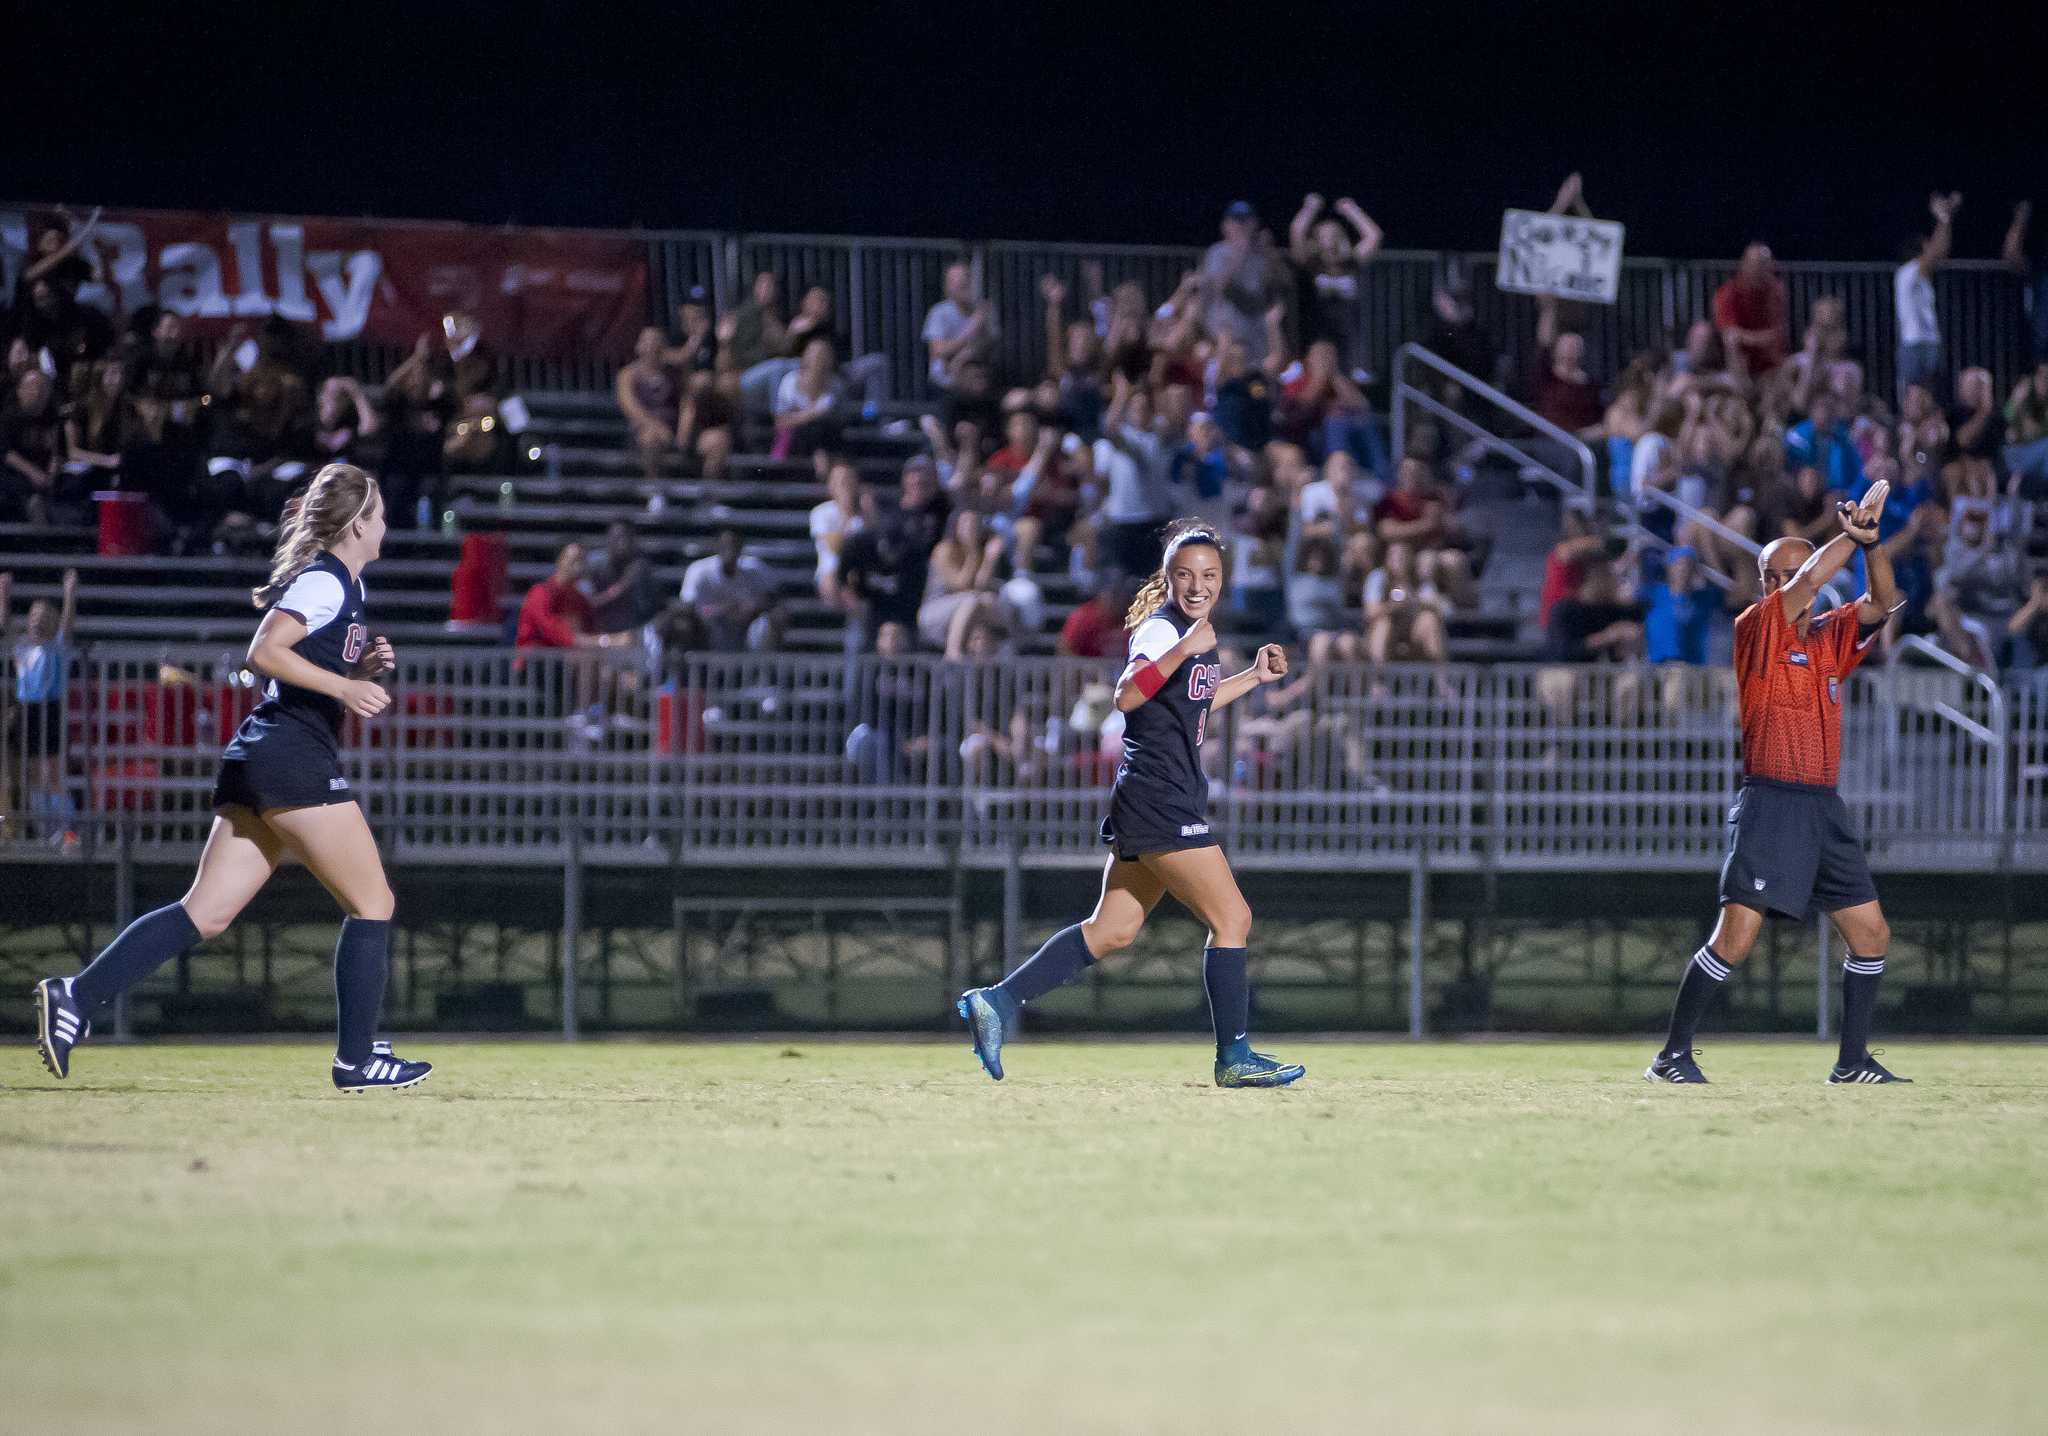 Sophomore+forward+Cynthia+Sanchez+was+a+terror+for+opposing+defenses%2C+notching+25+points+with+11+goals.+Photo+credit%3A+David+Hawkins